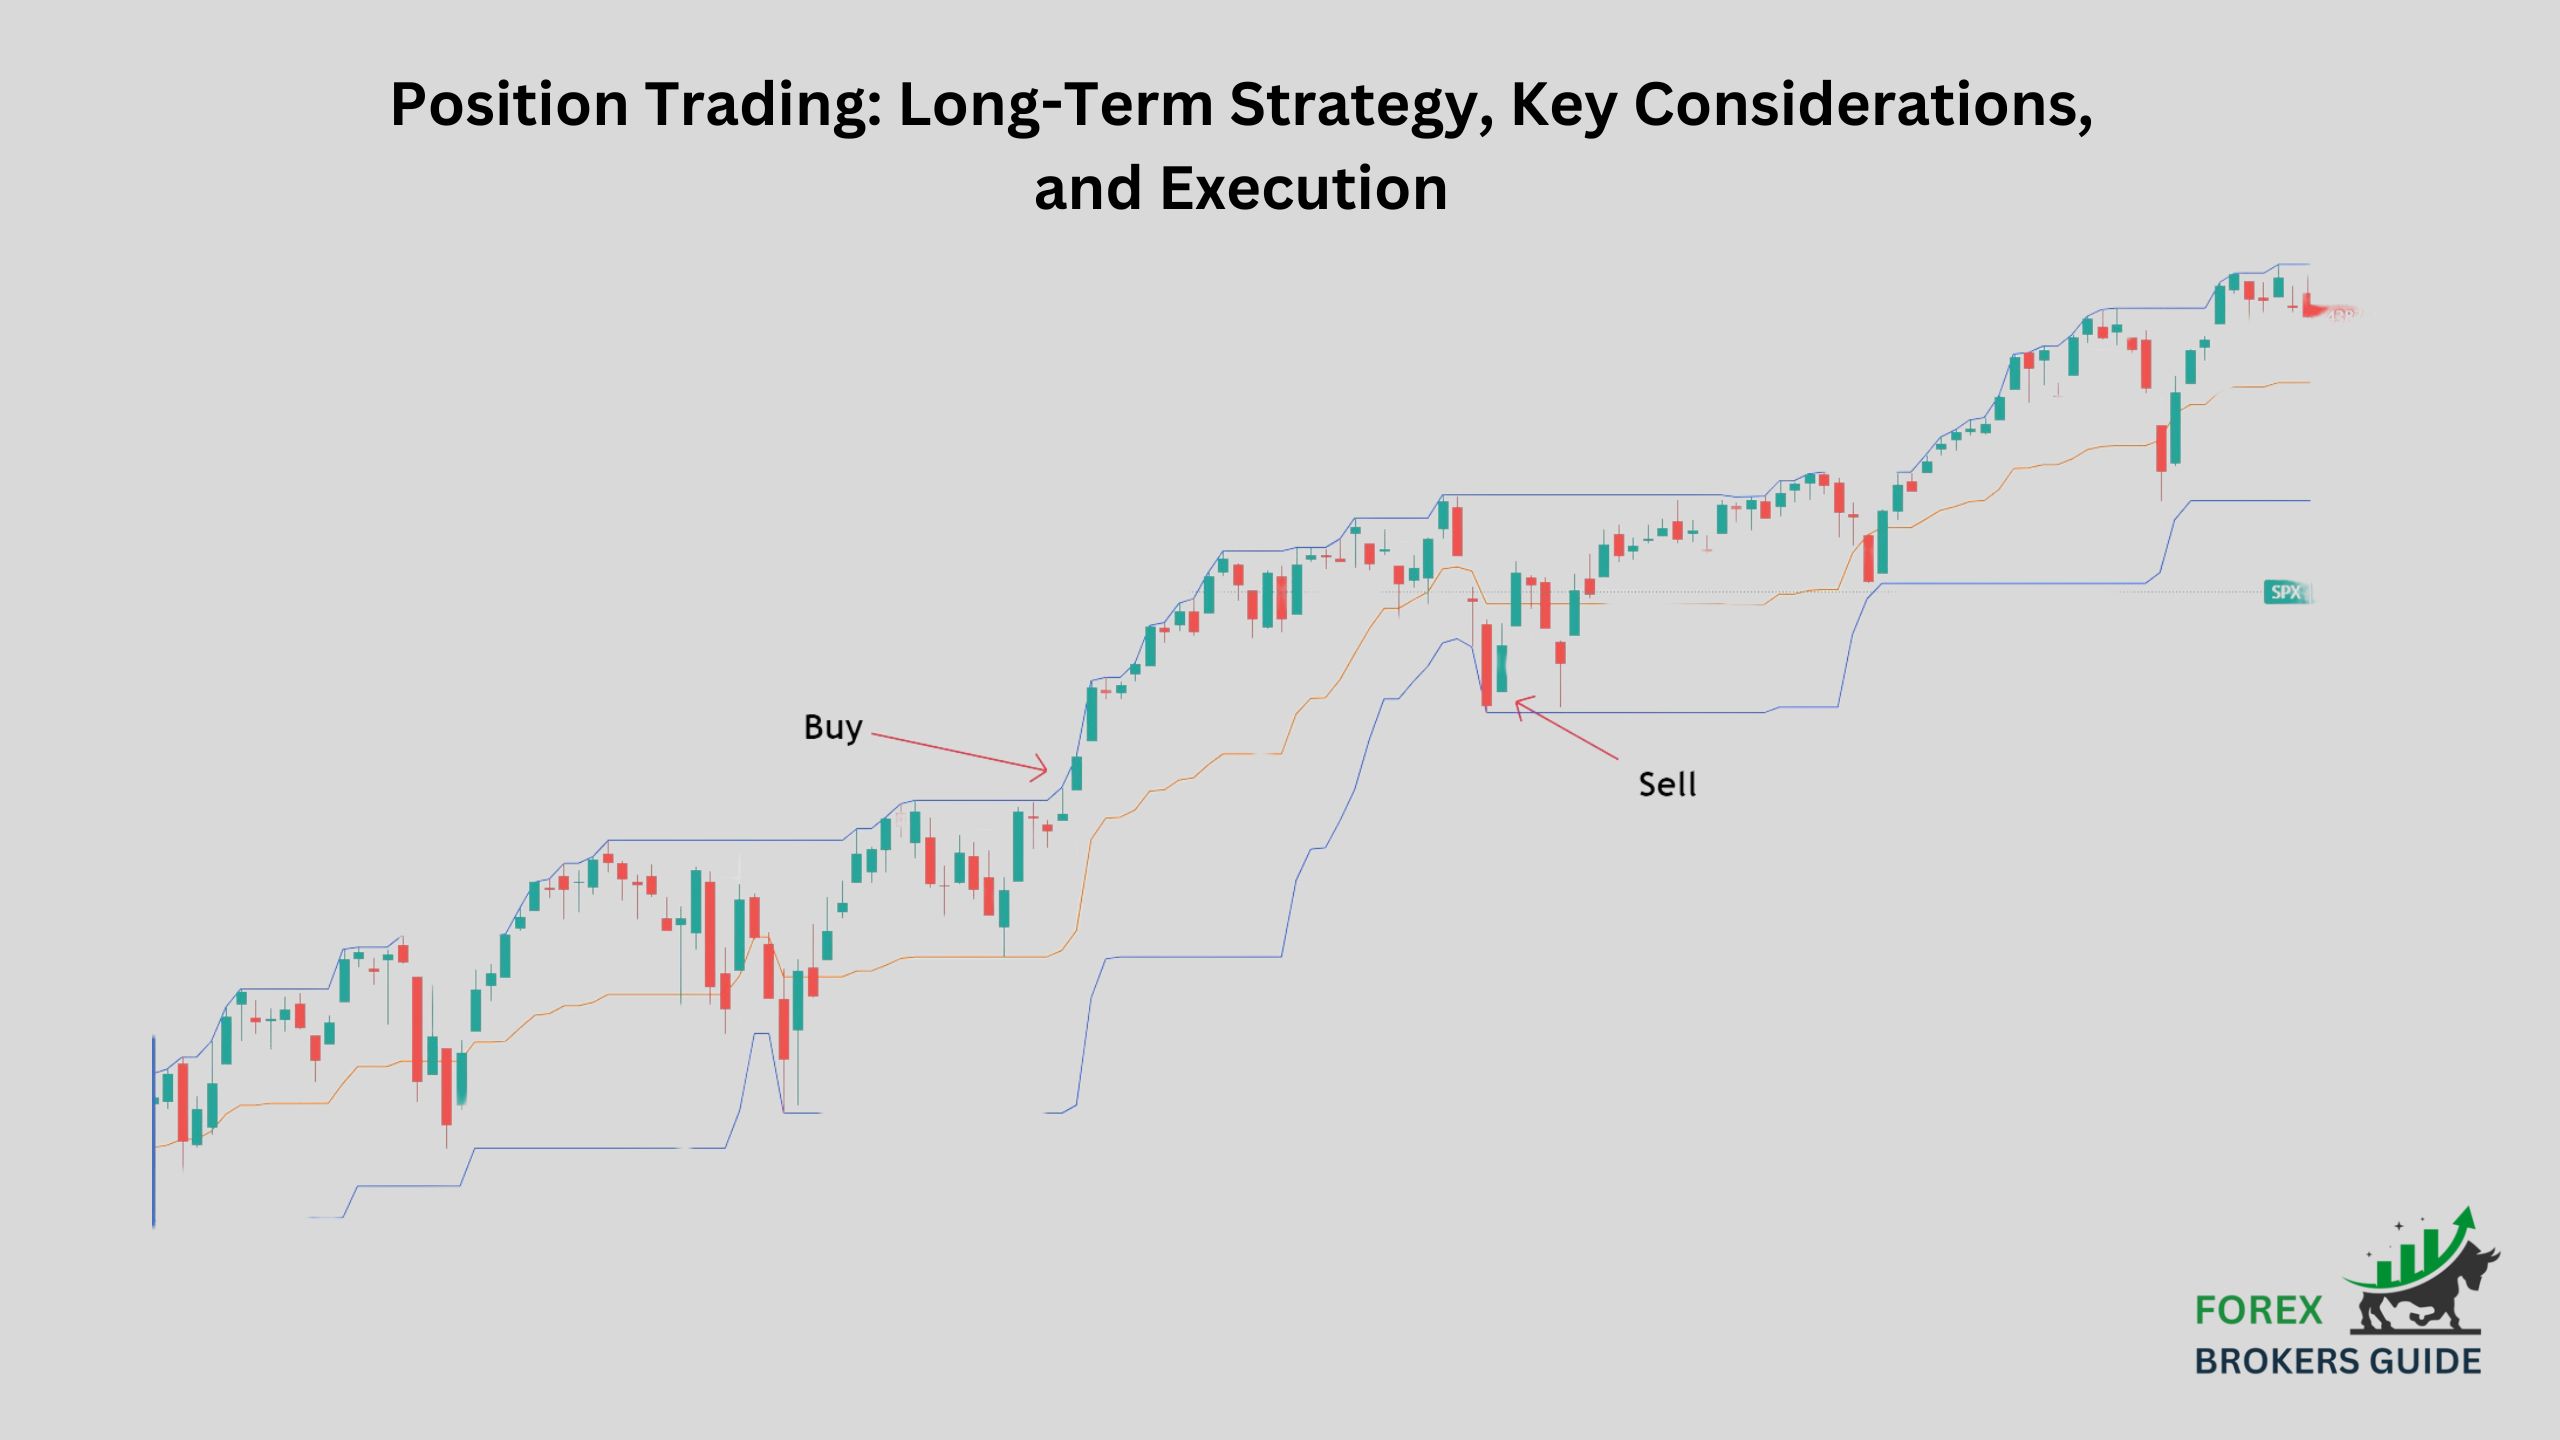 Position Trading Long-Term Strategy, Key Considerations, and Execution